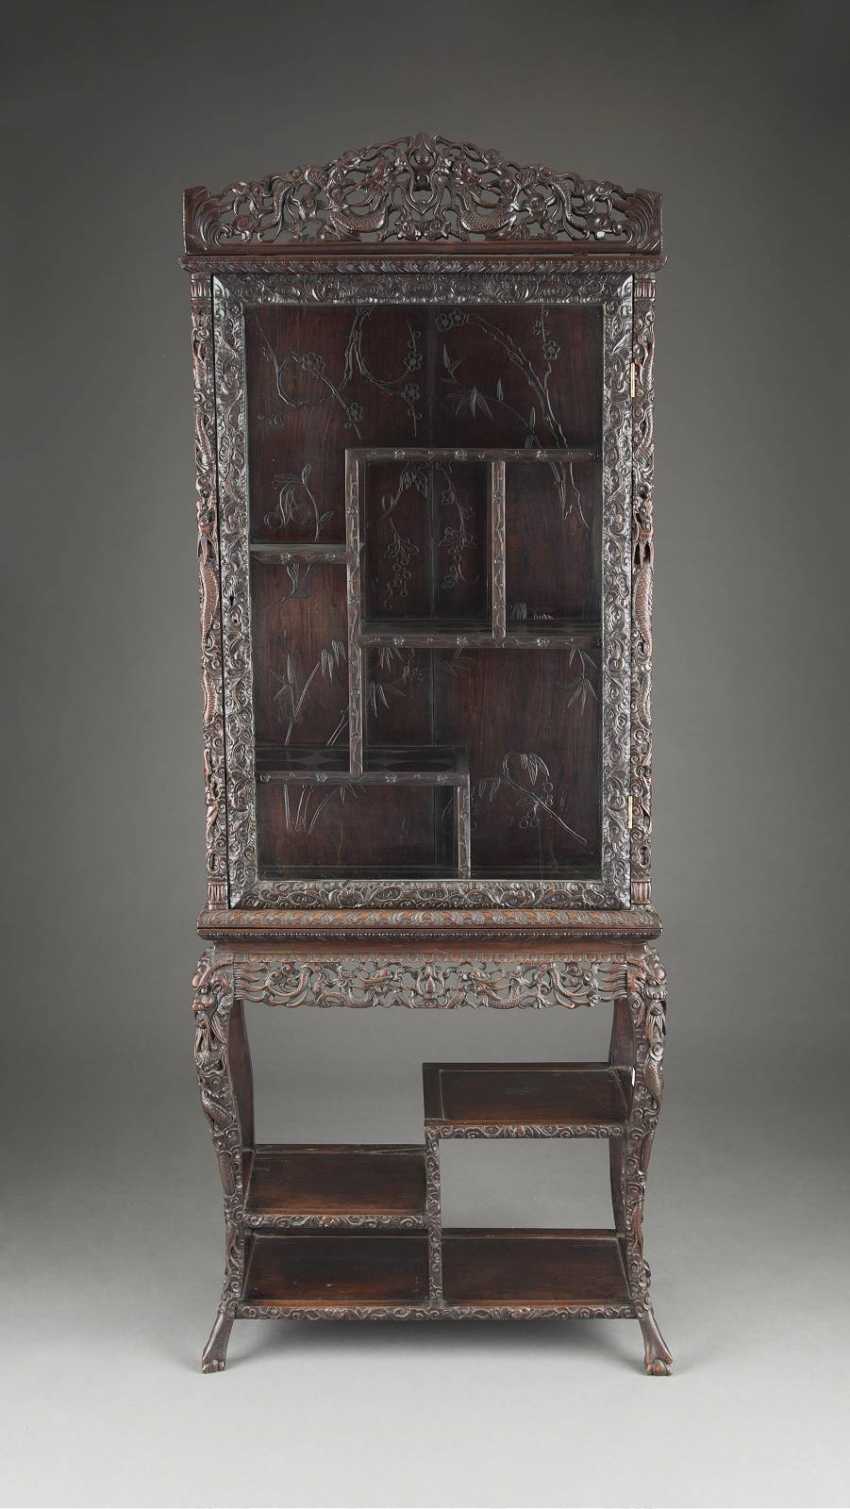 Lot 273 Top Display Cabinet With Dragon Decoration In Relief From